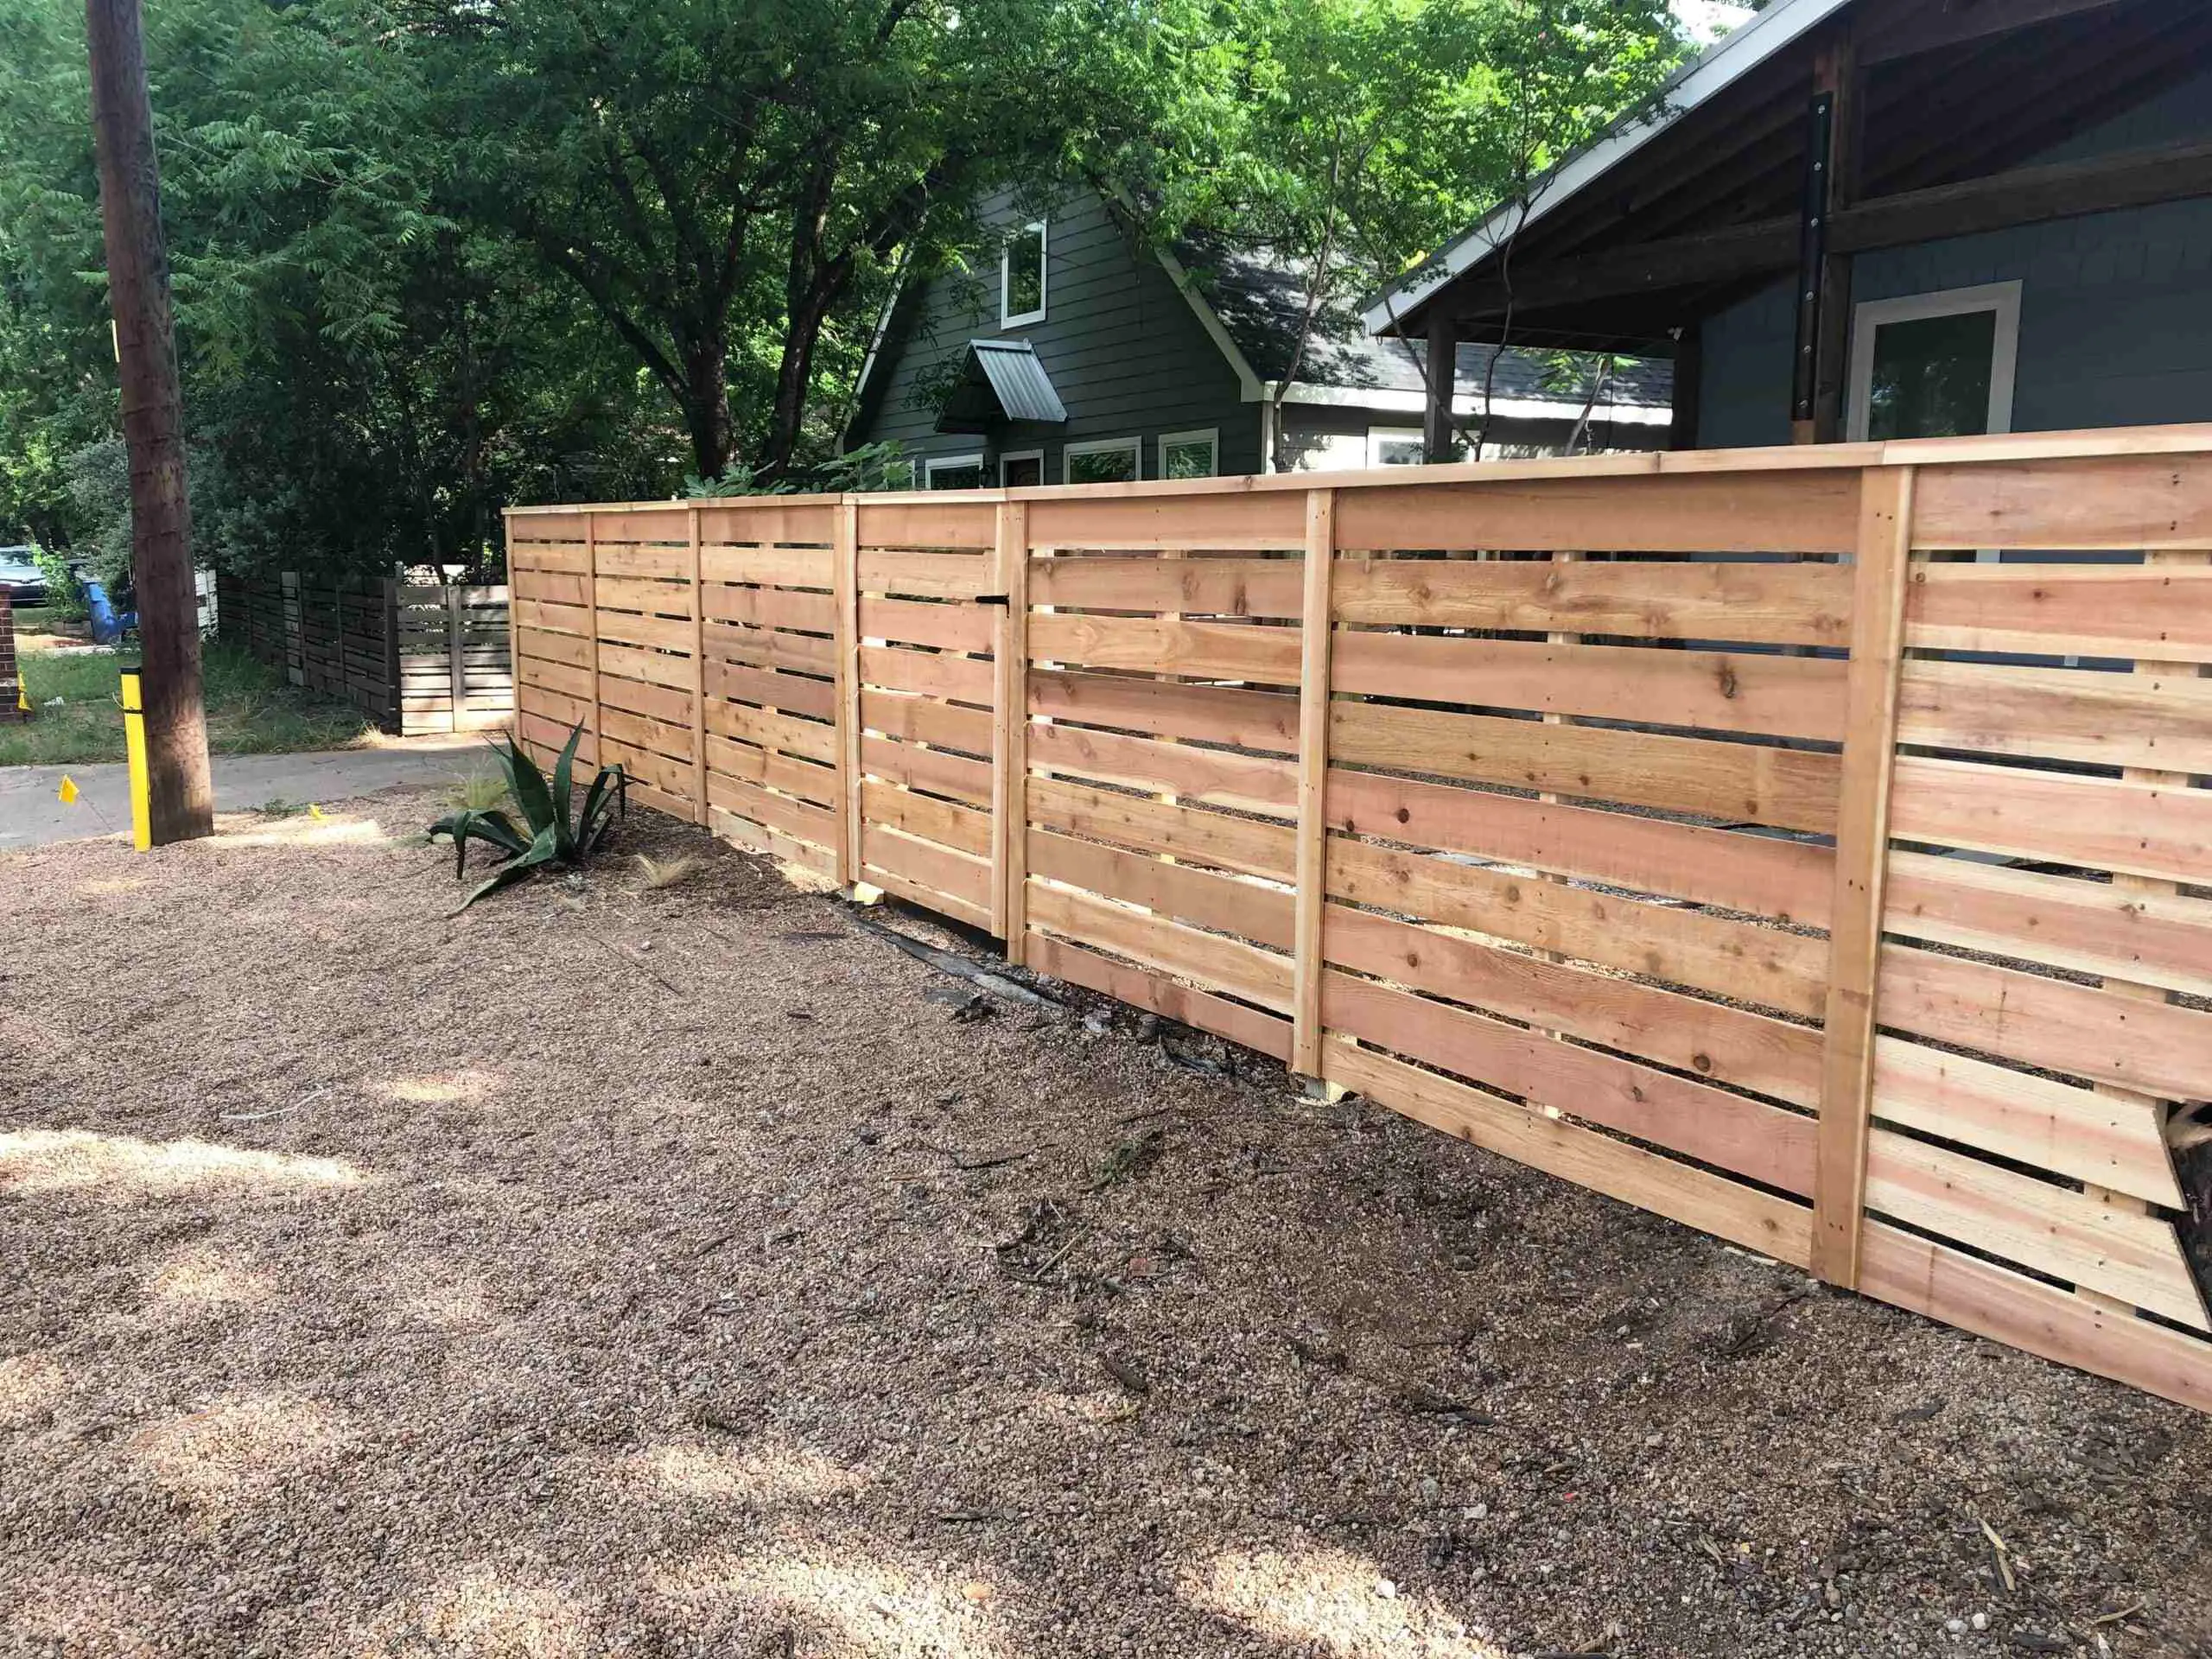 Six foot horizontal fence with one inch gaps between slats